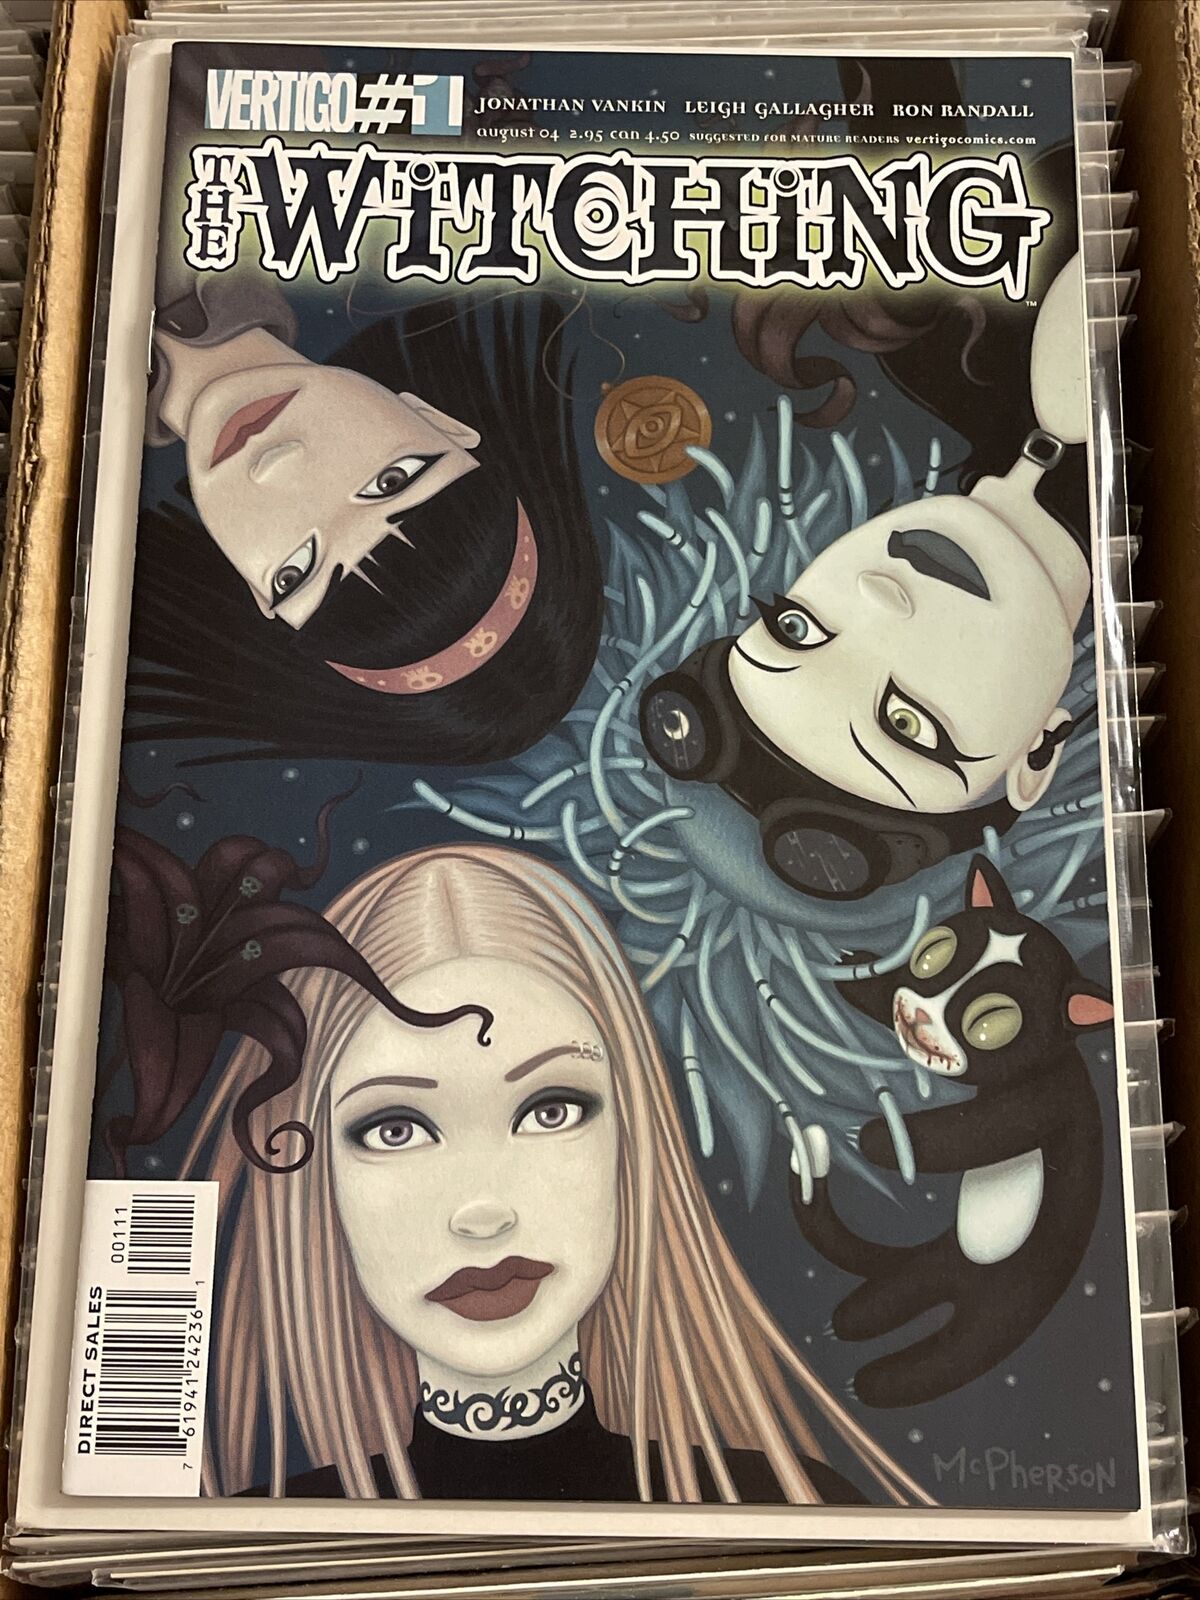 THE WITCHING #1 TARA MCPHERSON GALLERY POSTER CULT ARTIST EARLY WORK HTF RARE